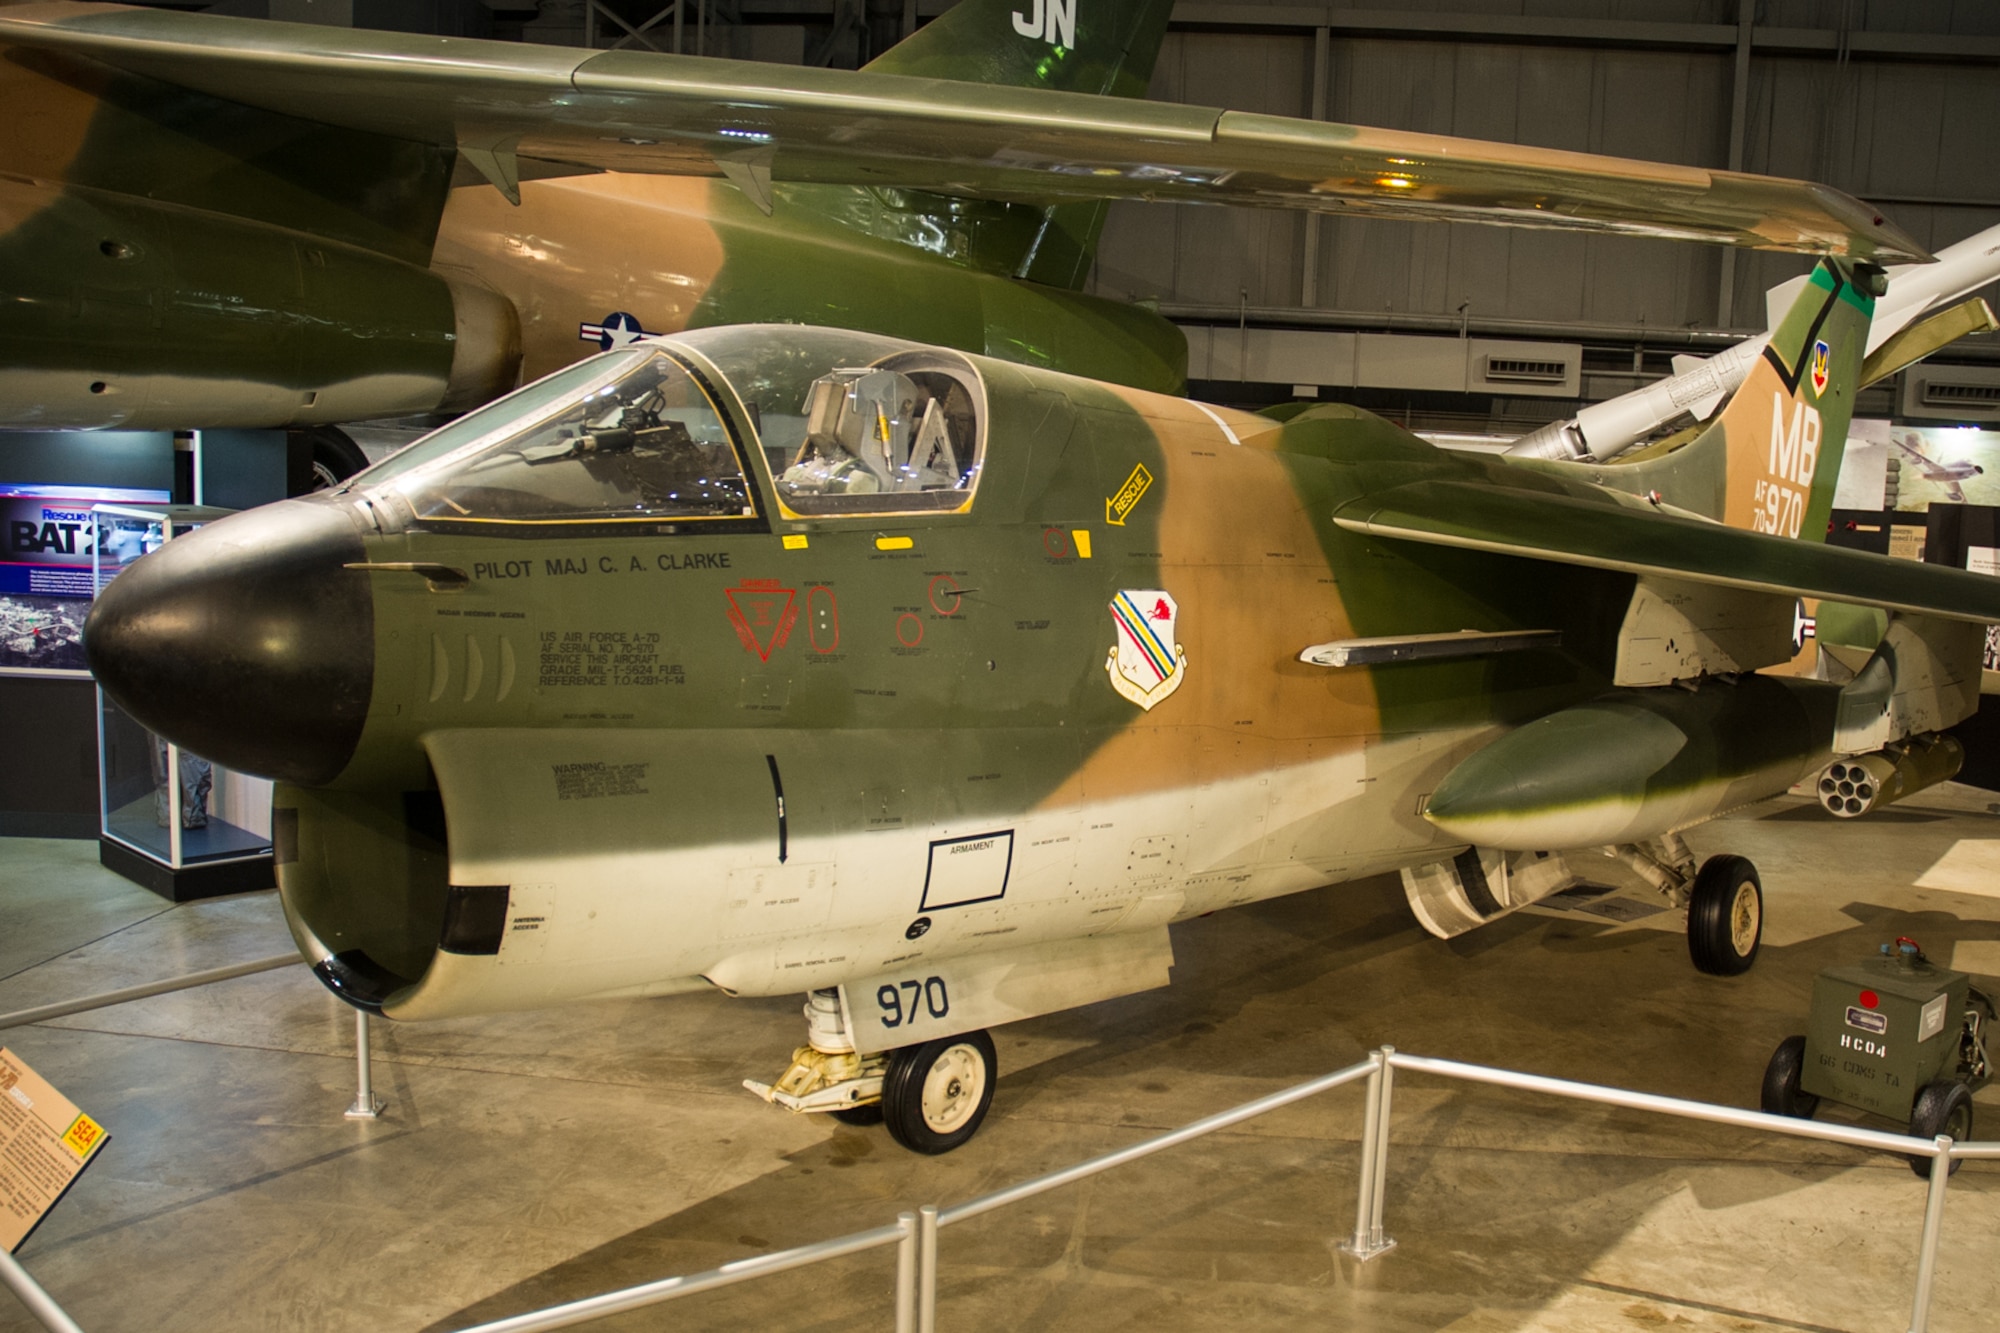 DAYTON, Ohio -- LTV A-7D Corsair II in the Southeast Asia War Gallery at the National Museum of the U.S. Air Force. (U.S. Air Force photo) 